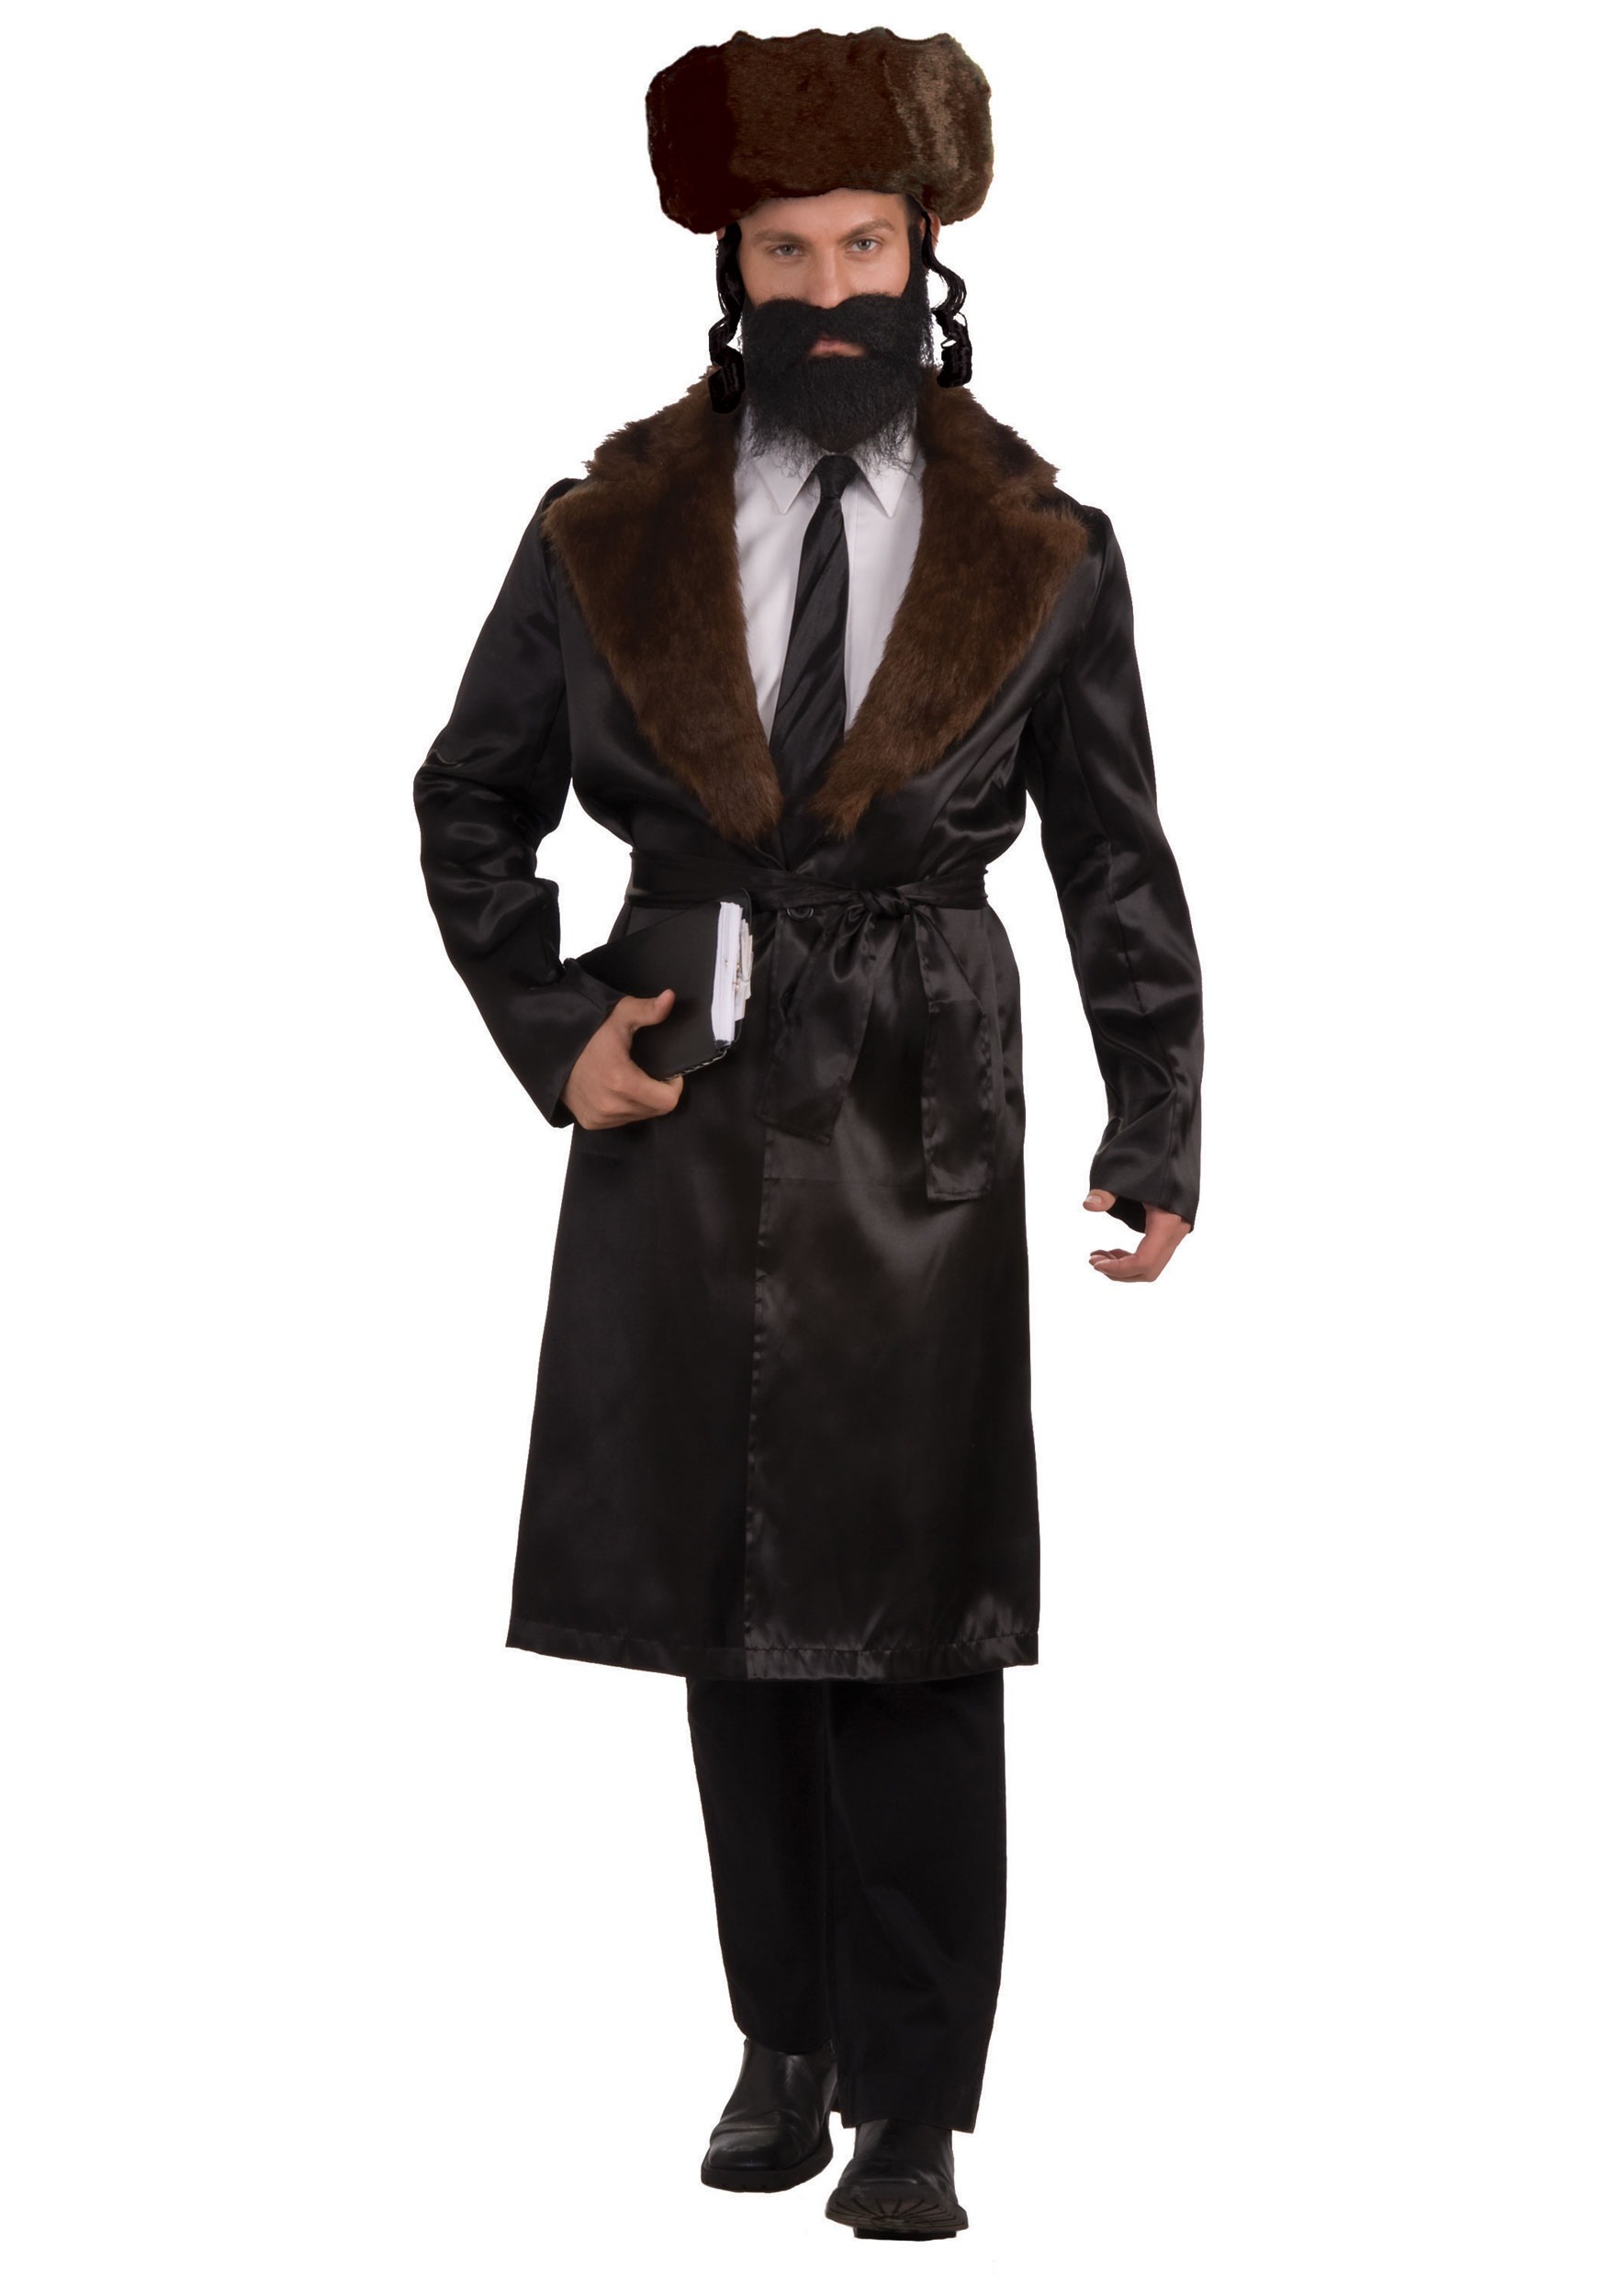 MENS RABBI COSTUME LONG COAT HAT WITH SIDEBURNS BEARD JEWISH FANCY DRESS OUTFIT 